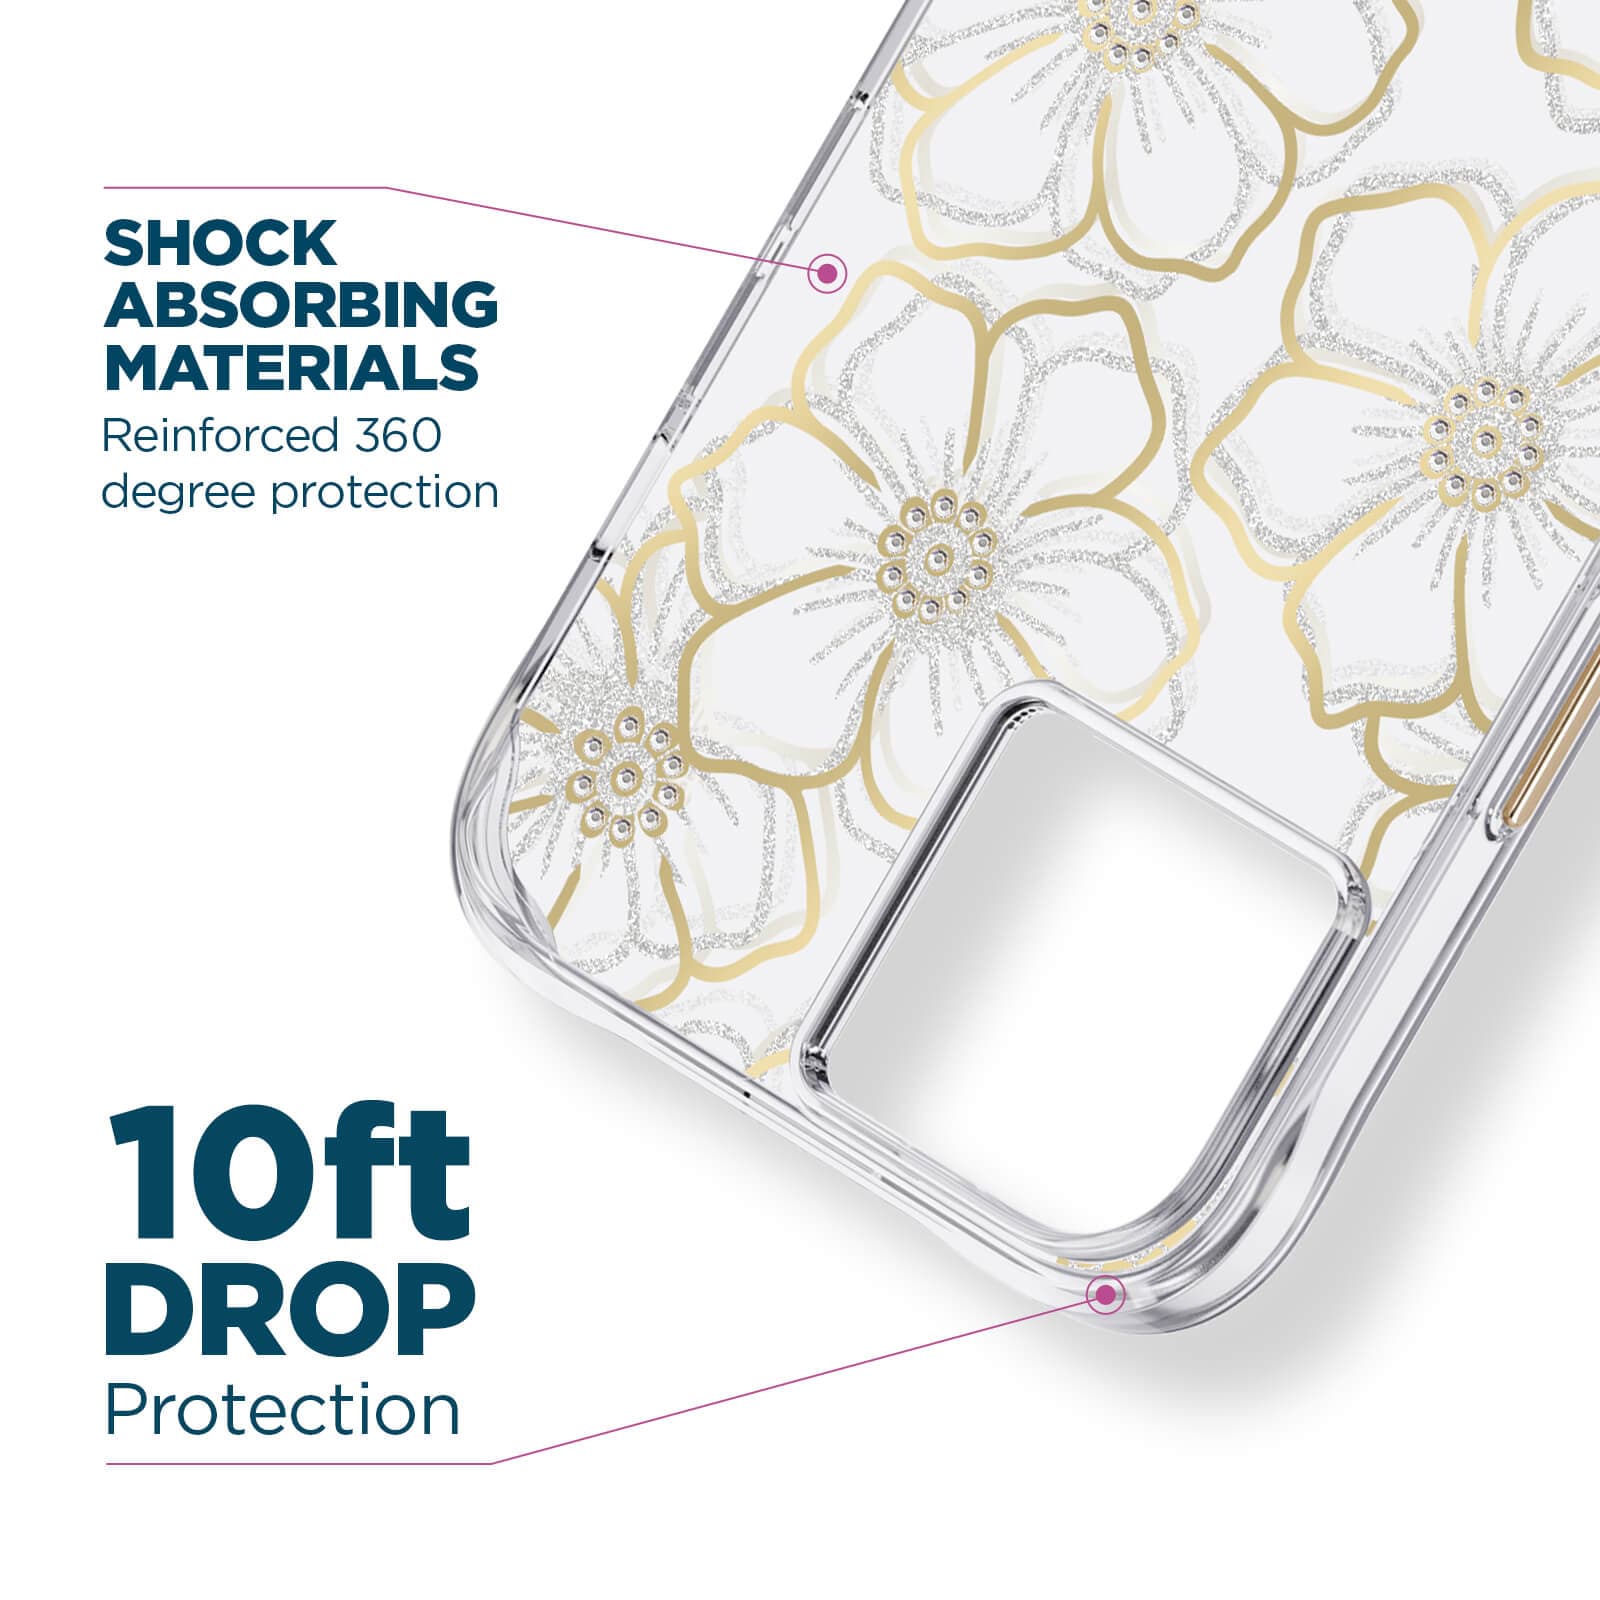 Shock absorbing materials. Reinforced 360 degree protection. 10ft drop protection. color::Floral Gems